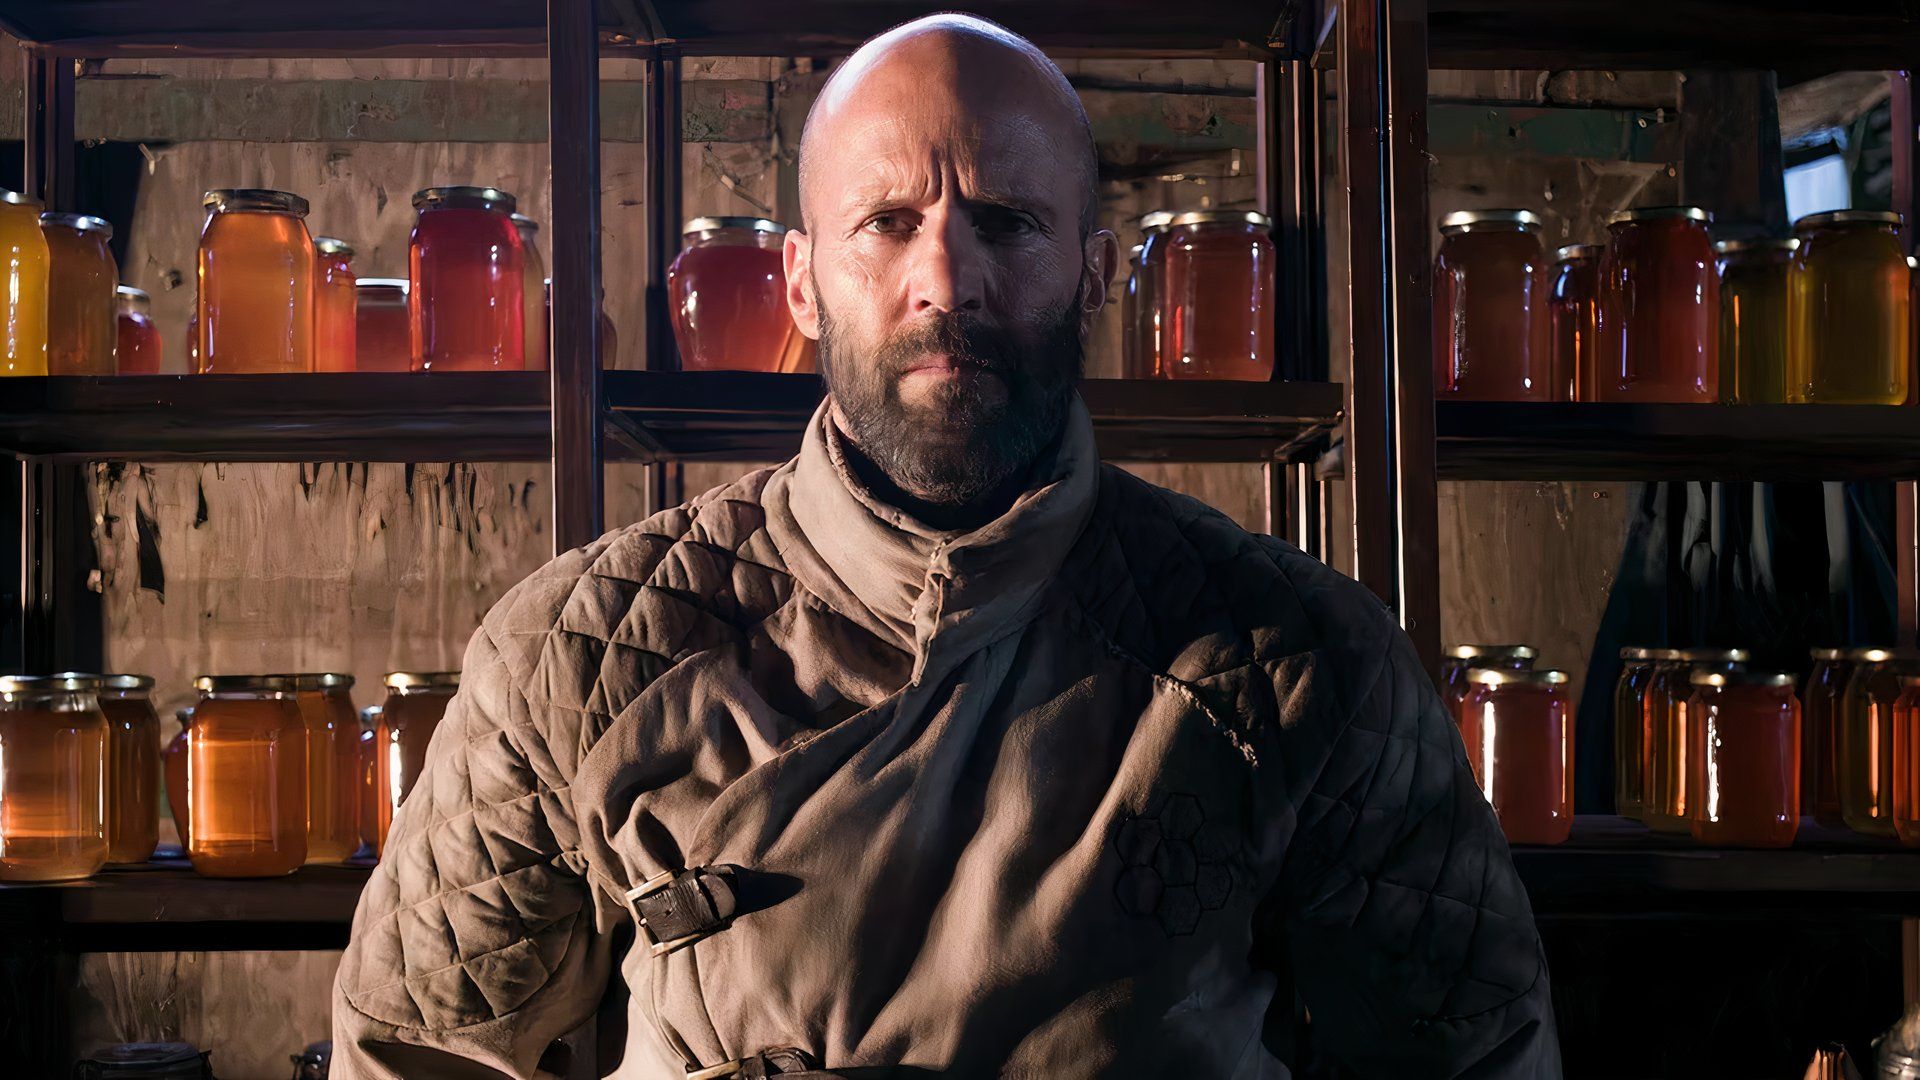 “The Beekeeper,” Jason Statham’s best film in years, is coming as a streaming version